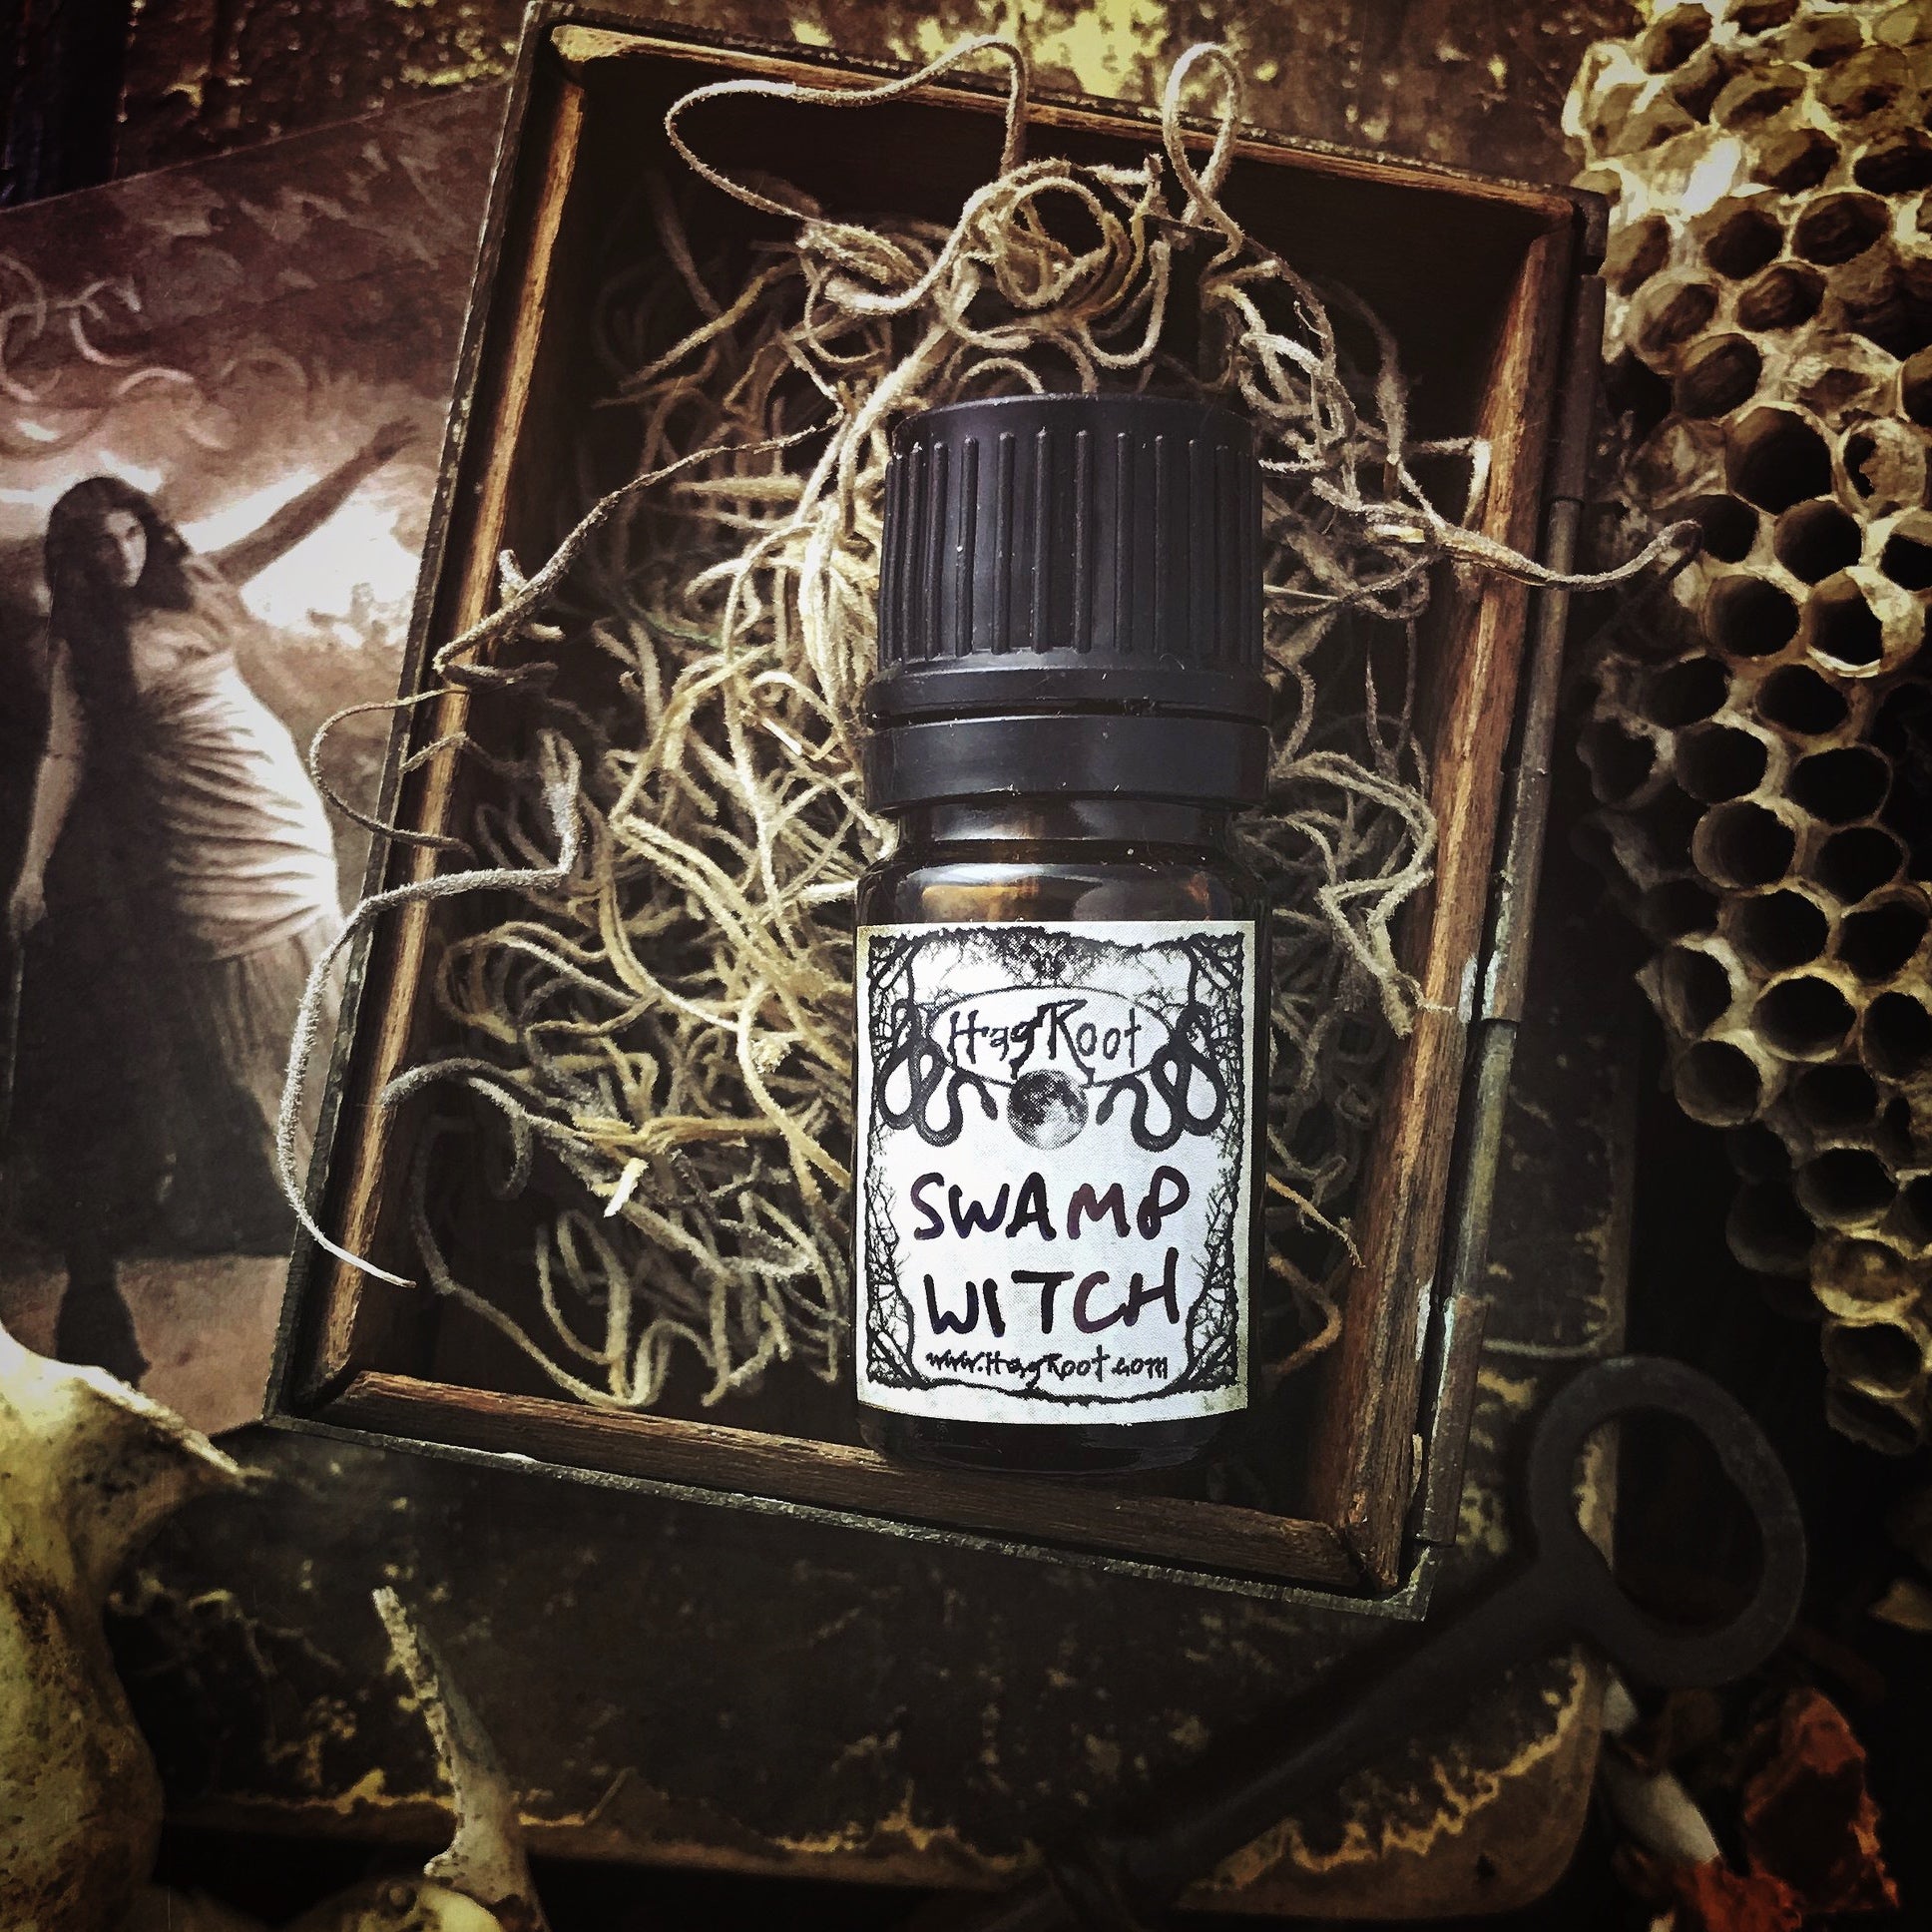 SWAMP WITCH-(Spanish Moss, Sandalwood, Pinion Wood, Tobacco, Labdanum, Patchouli, Cedar)-Perfume, Cologne, Anointing, Ritual Oil